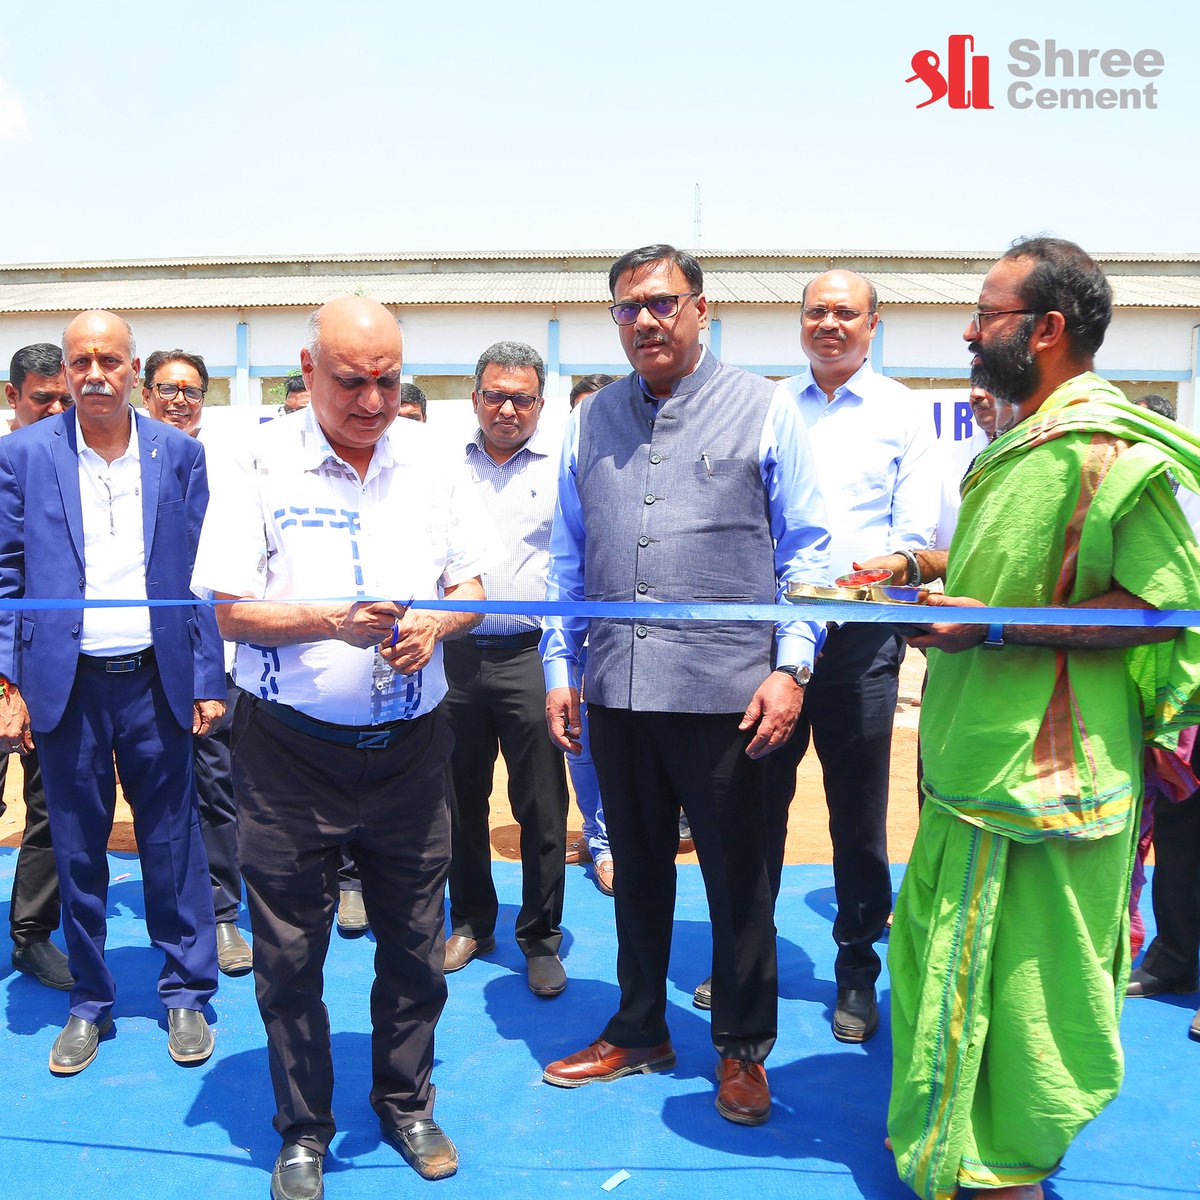 @shreecementltd announced the launch of Bangur Concrete with the commissioning of its first Greenfield Ready Mix Concrete (RMC) plant in Hyderabad. The plant which was inaugurated by Shri HM Bangur, Chairman Shree Cement has a capacity of 90 cubic meters per hour. The…